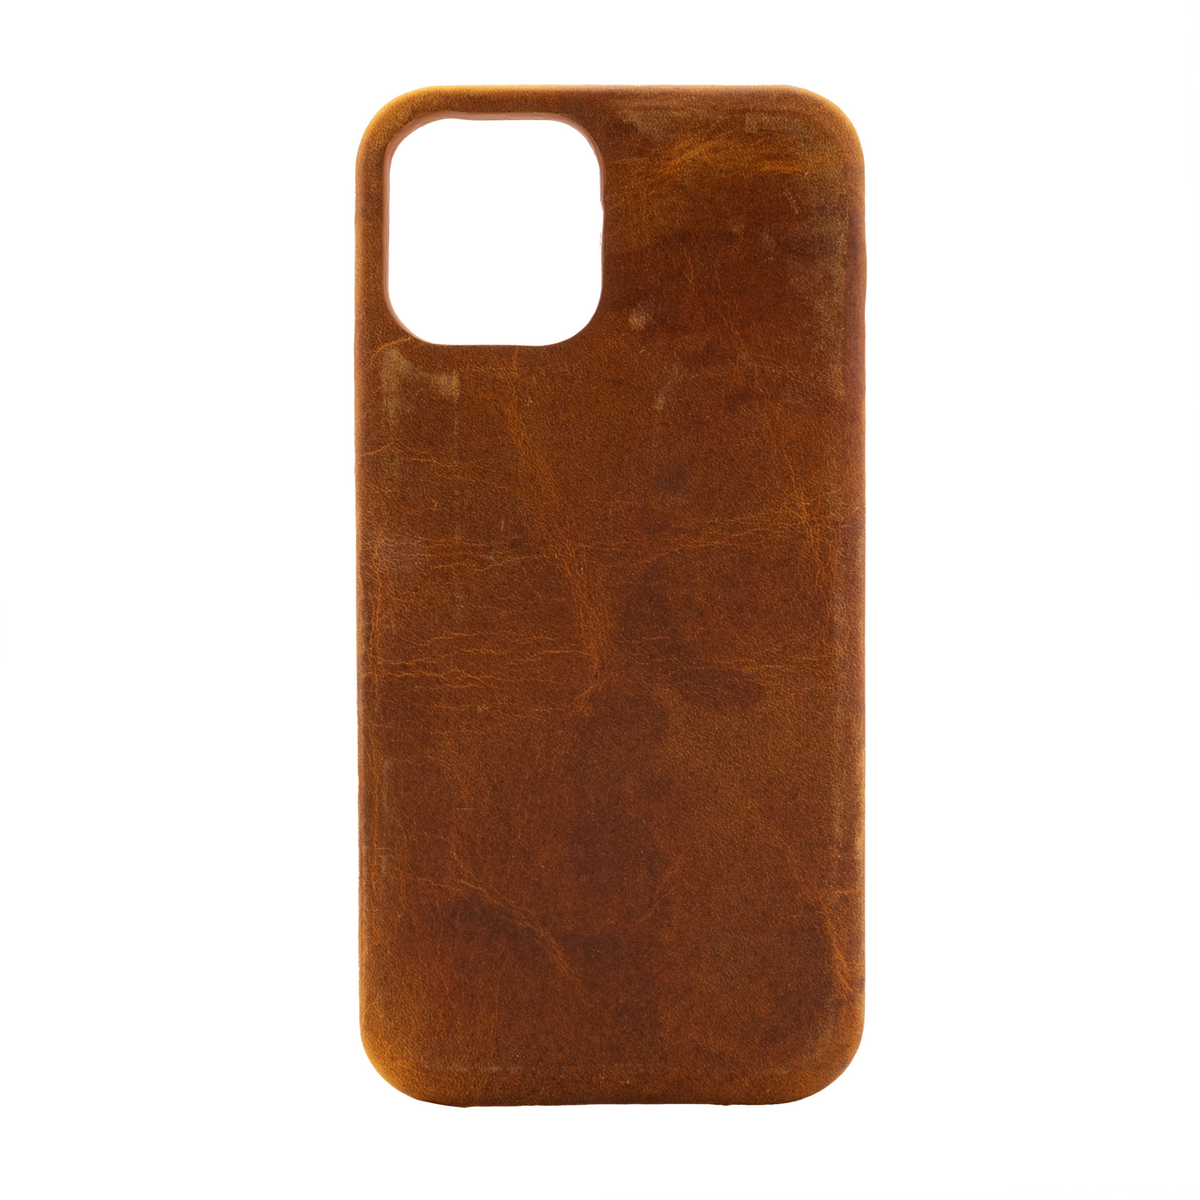 Galen Leather Co. Leather Hardback Case Iphone 12 Mini (5.4")- Crazy Horse Brown